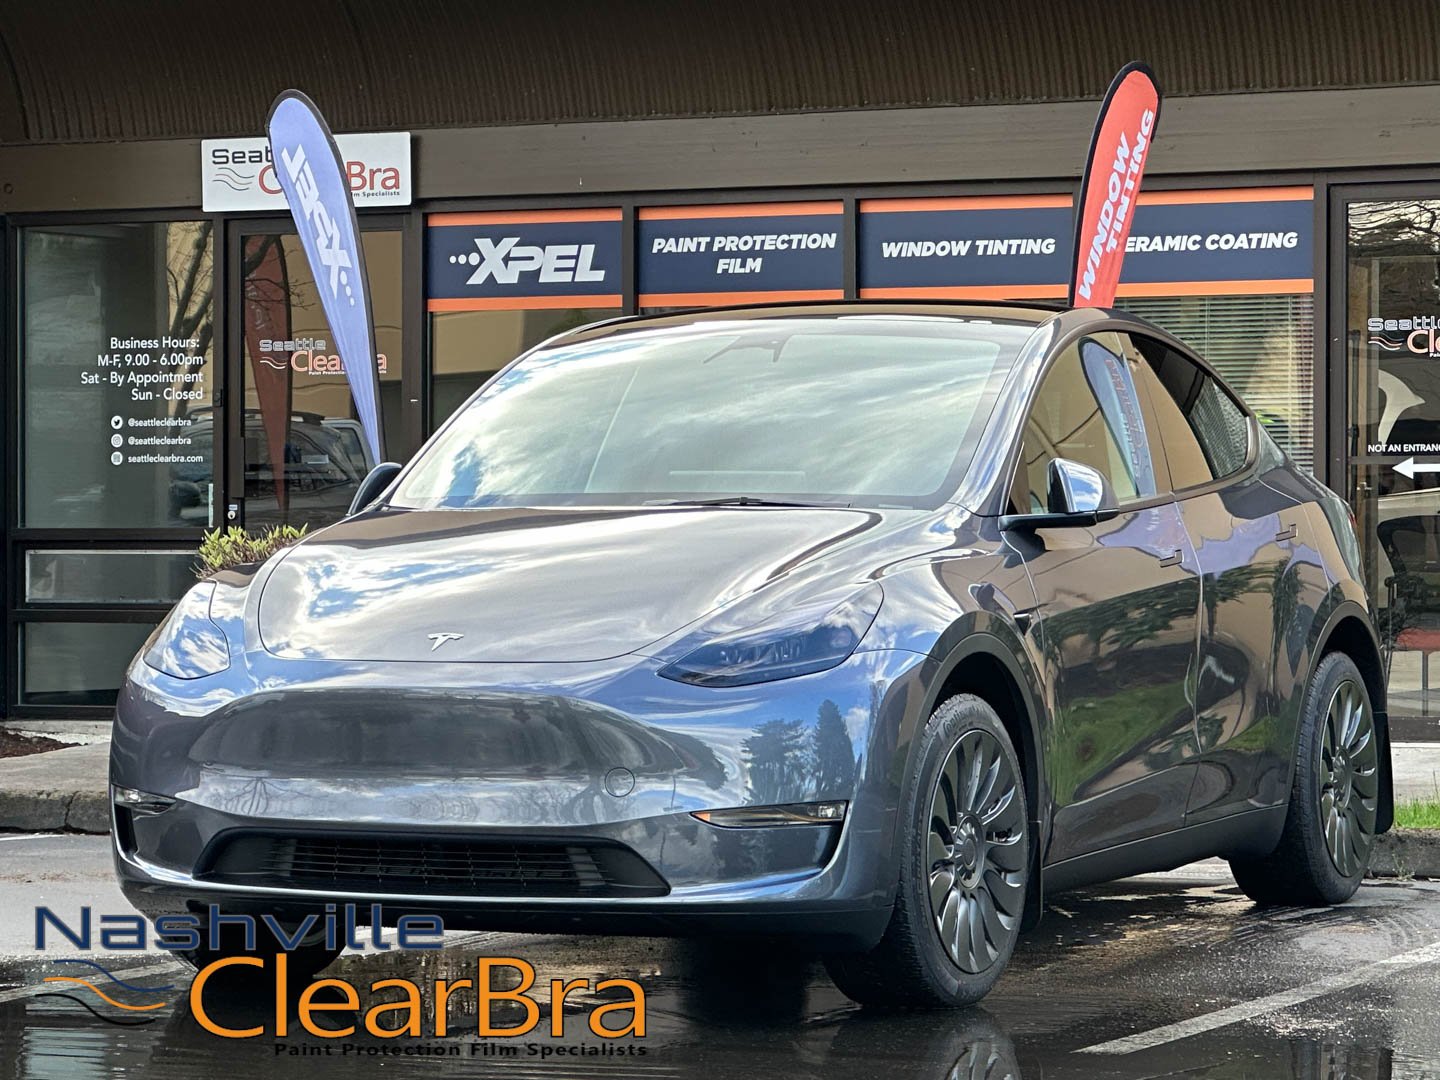 nashville-clearbra-xpel-ultimate-fusion-prime-clear-bra-ceramic-tint-ppf-paint-protection-film...jpg